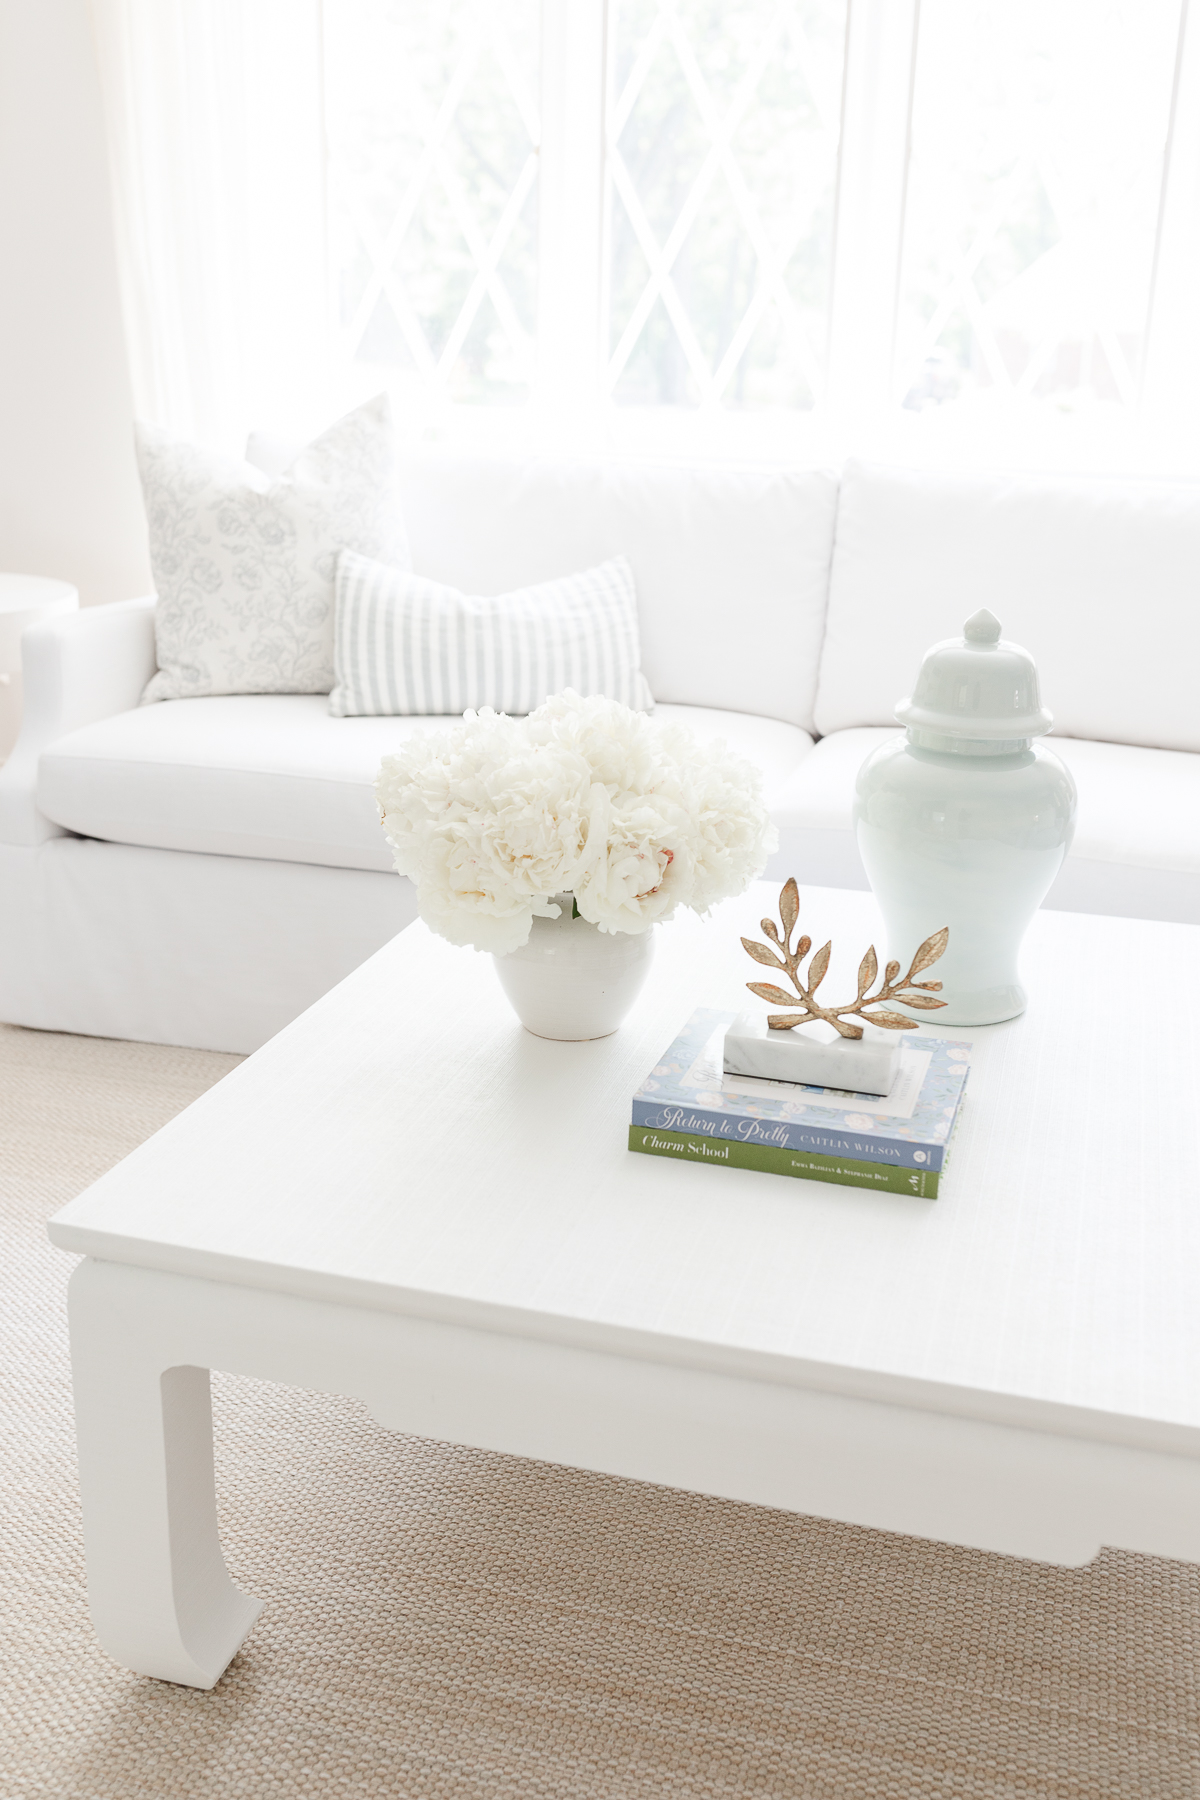 A living room with a minimalist aesthetic in shades of white.